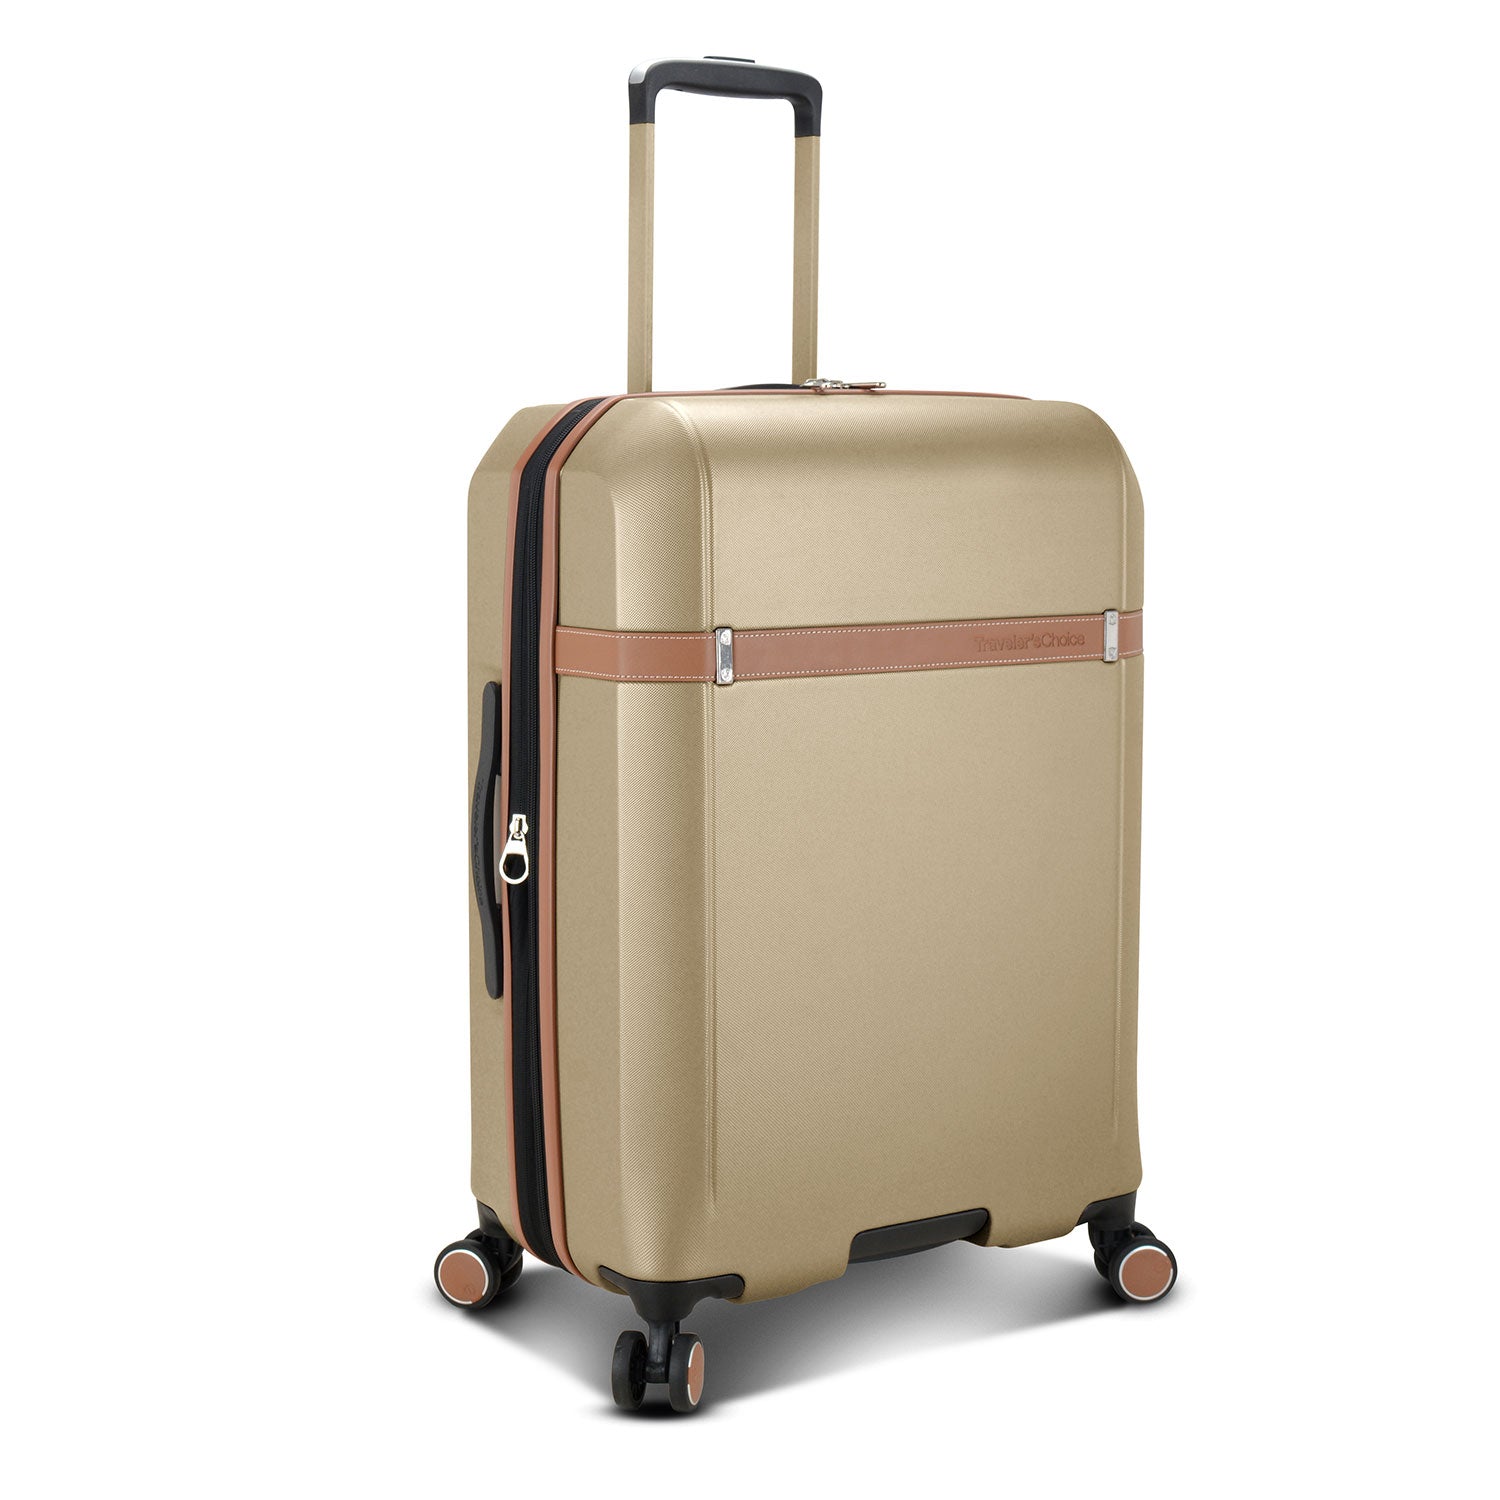 Candlewood Medium Checked Luggage Suitcase with 4 Spinner Wheels